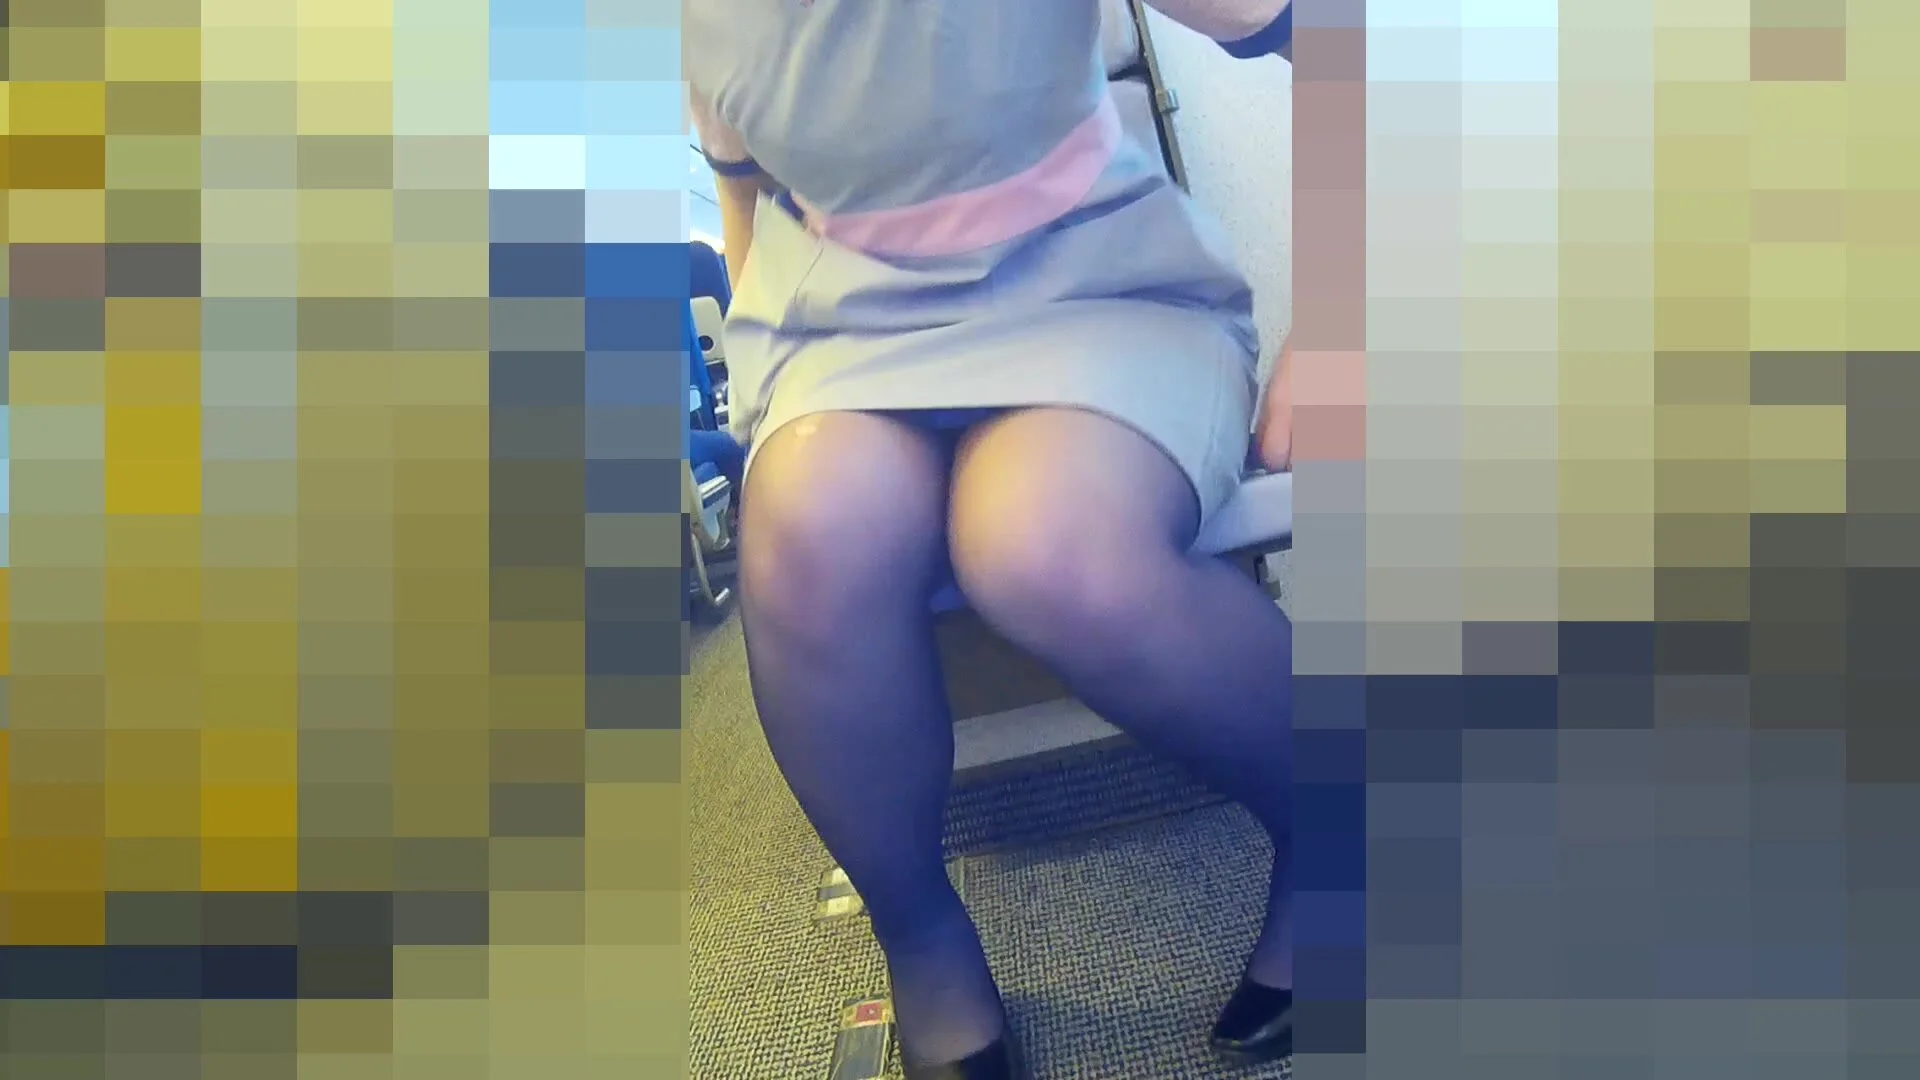 Asian Stuff Japanese Air Stewardess Pantyhose… ThisVid picture pic